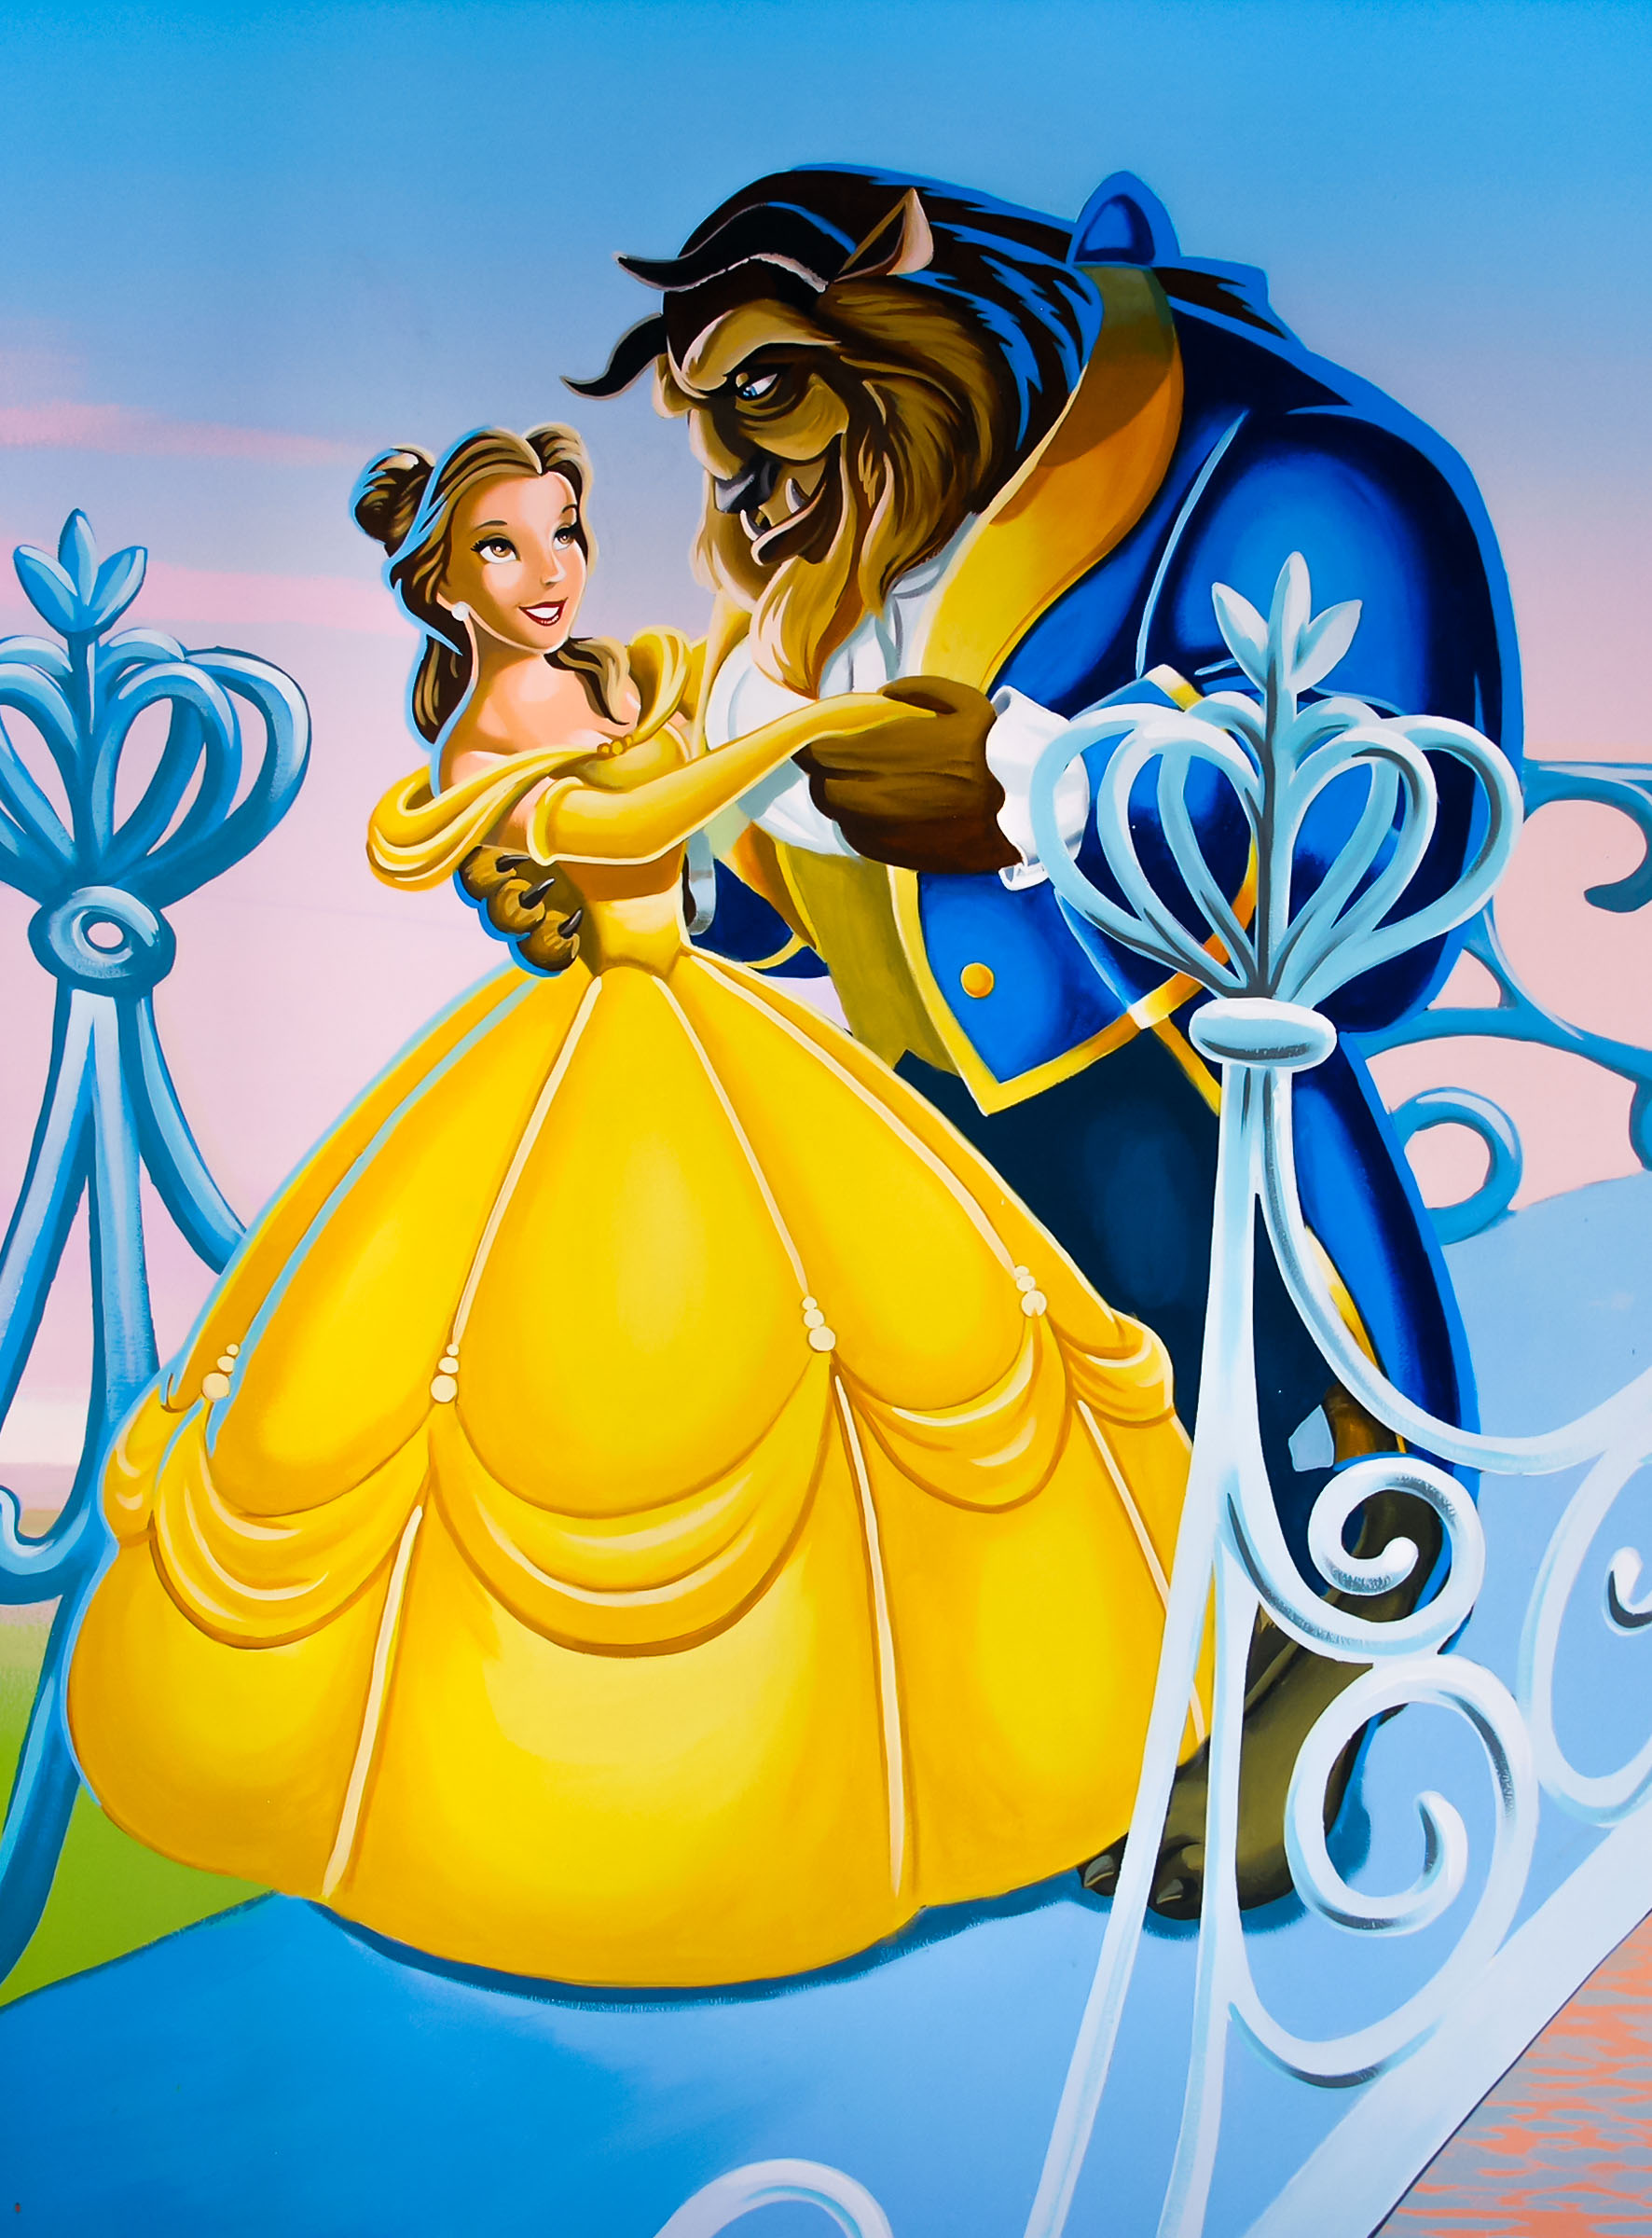 Beauty and the Beast Artwork looks great in a little girl's bedroom